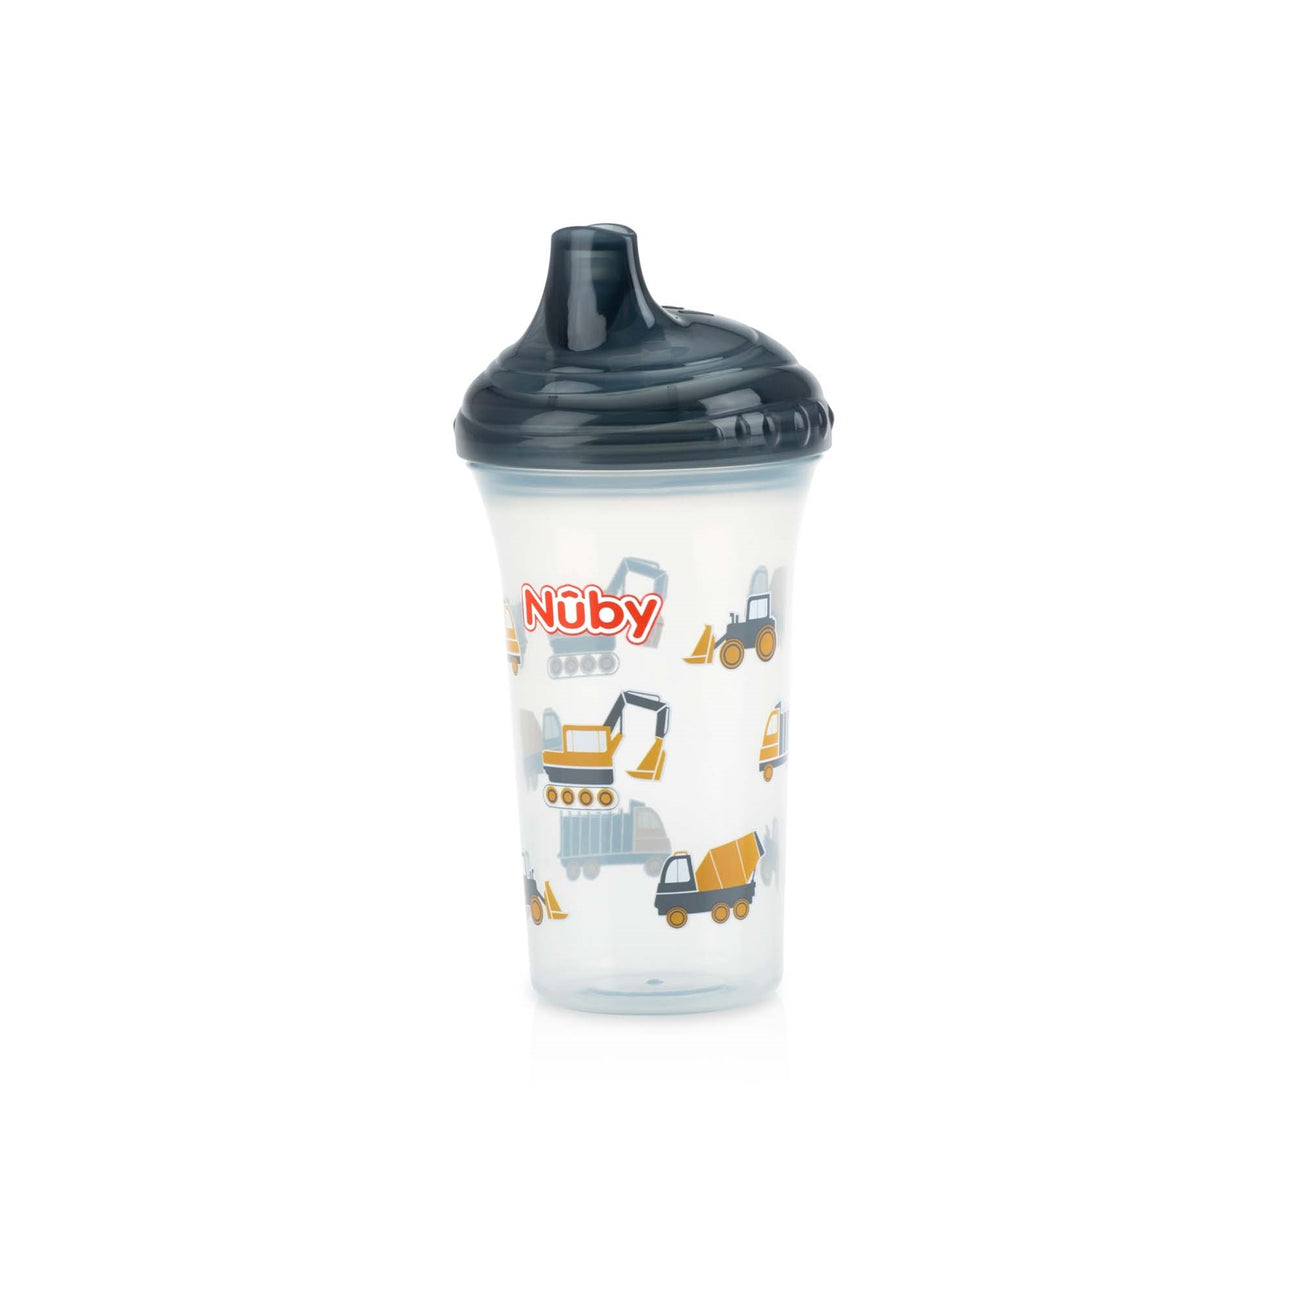 No-Spill Cup - Nuby US